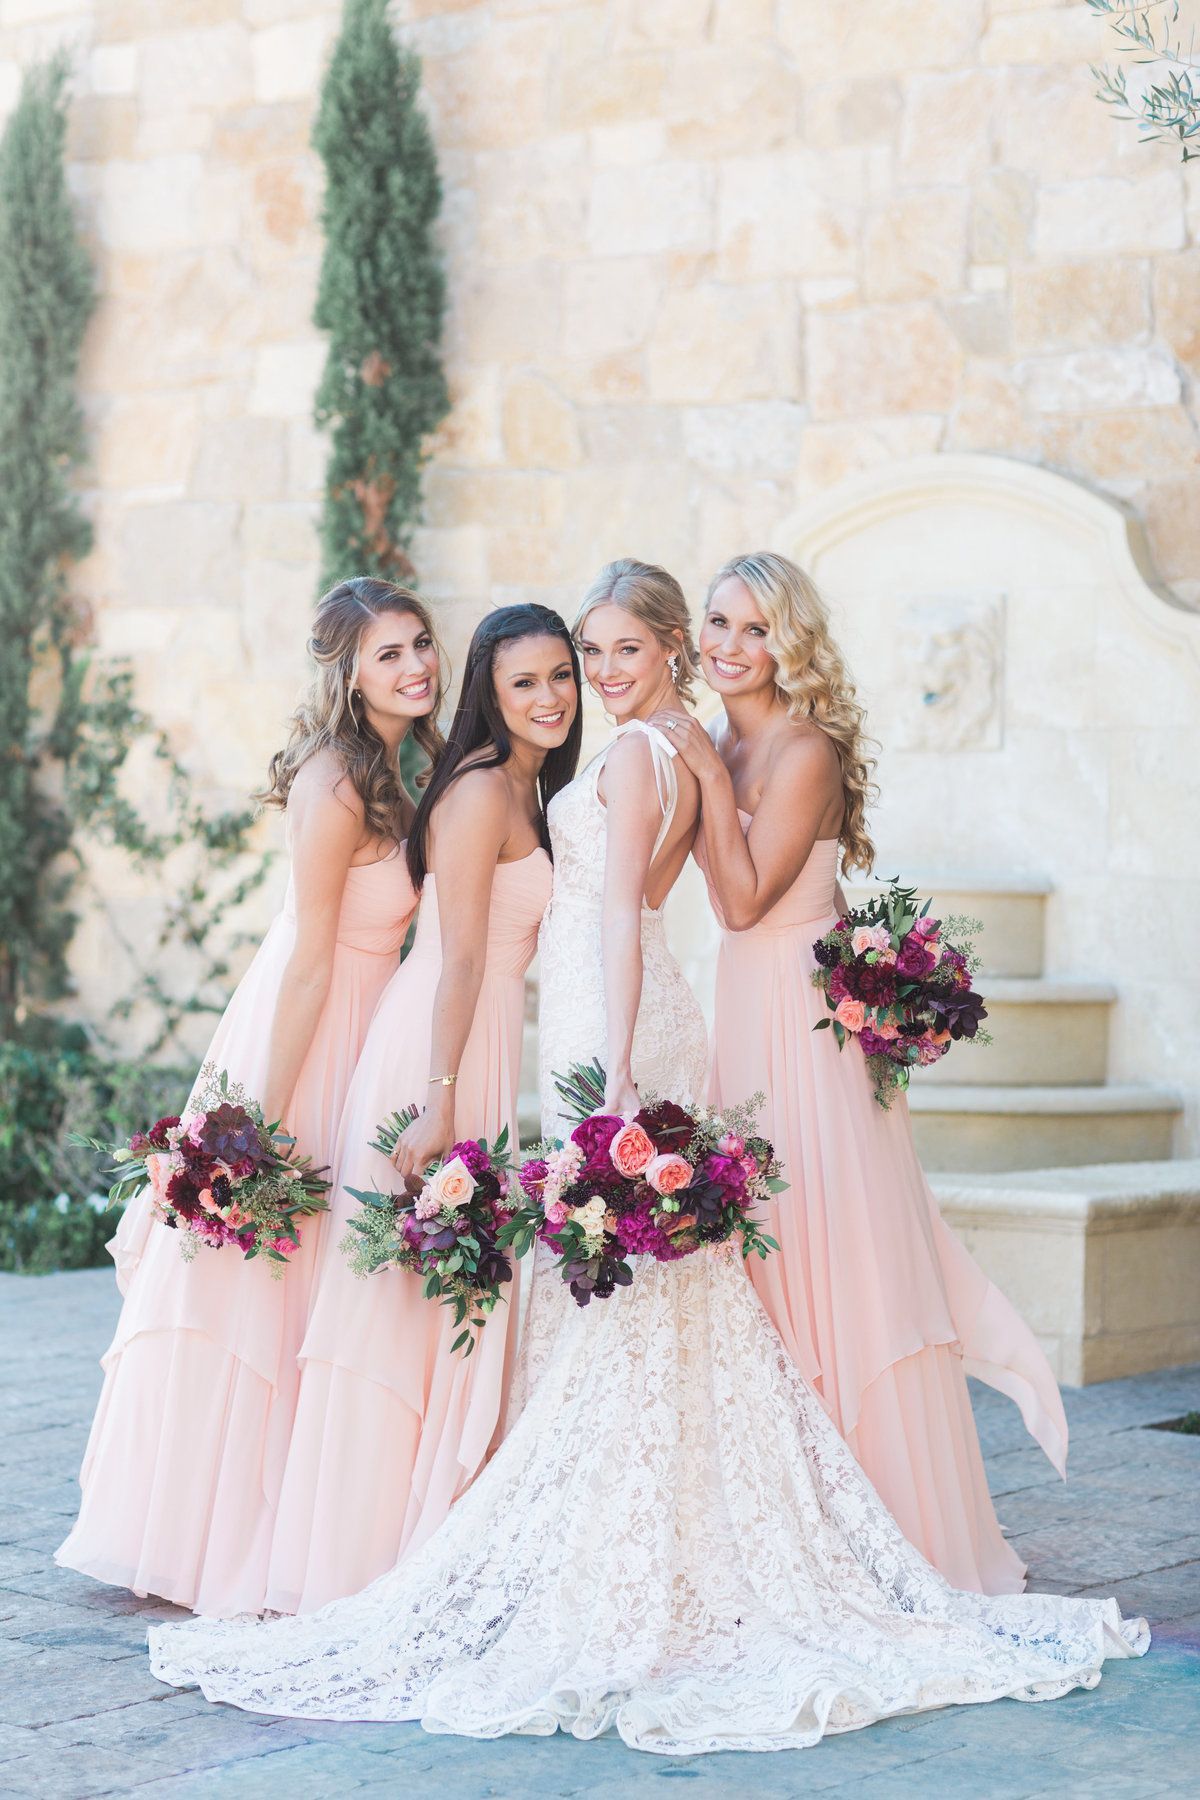 Pale pink bridesmaids with magenta rose bouquets at Malibu Rocky Oaks -   18 wedding Photography bridesmaids ideas